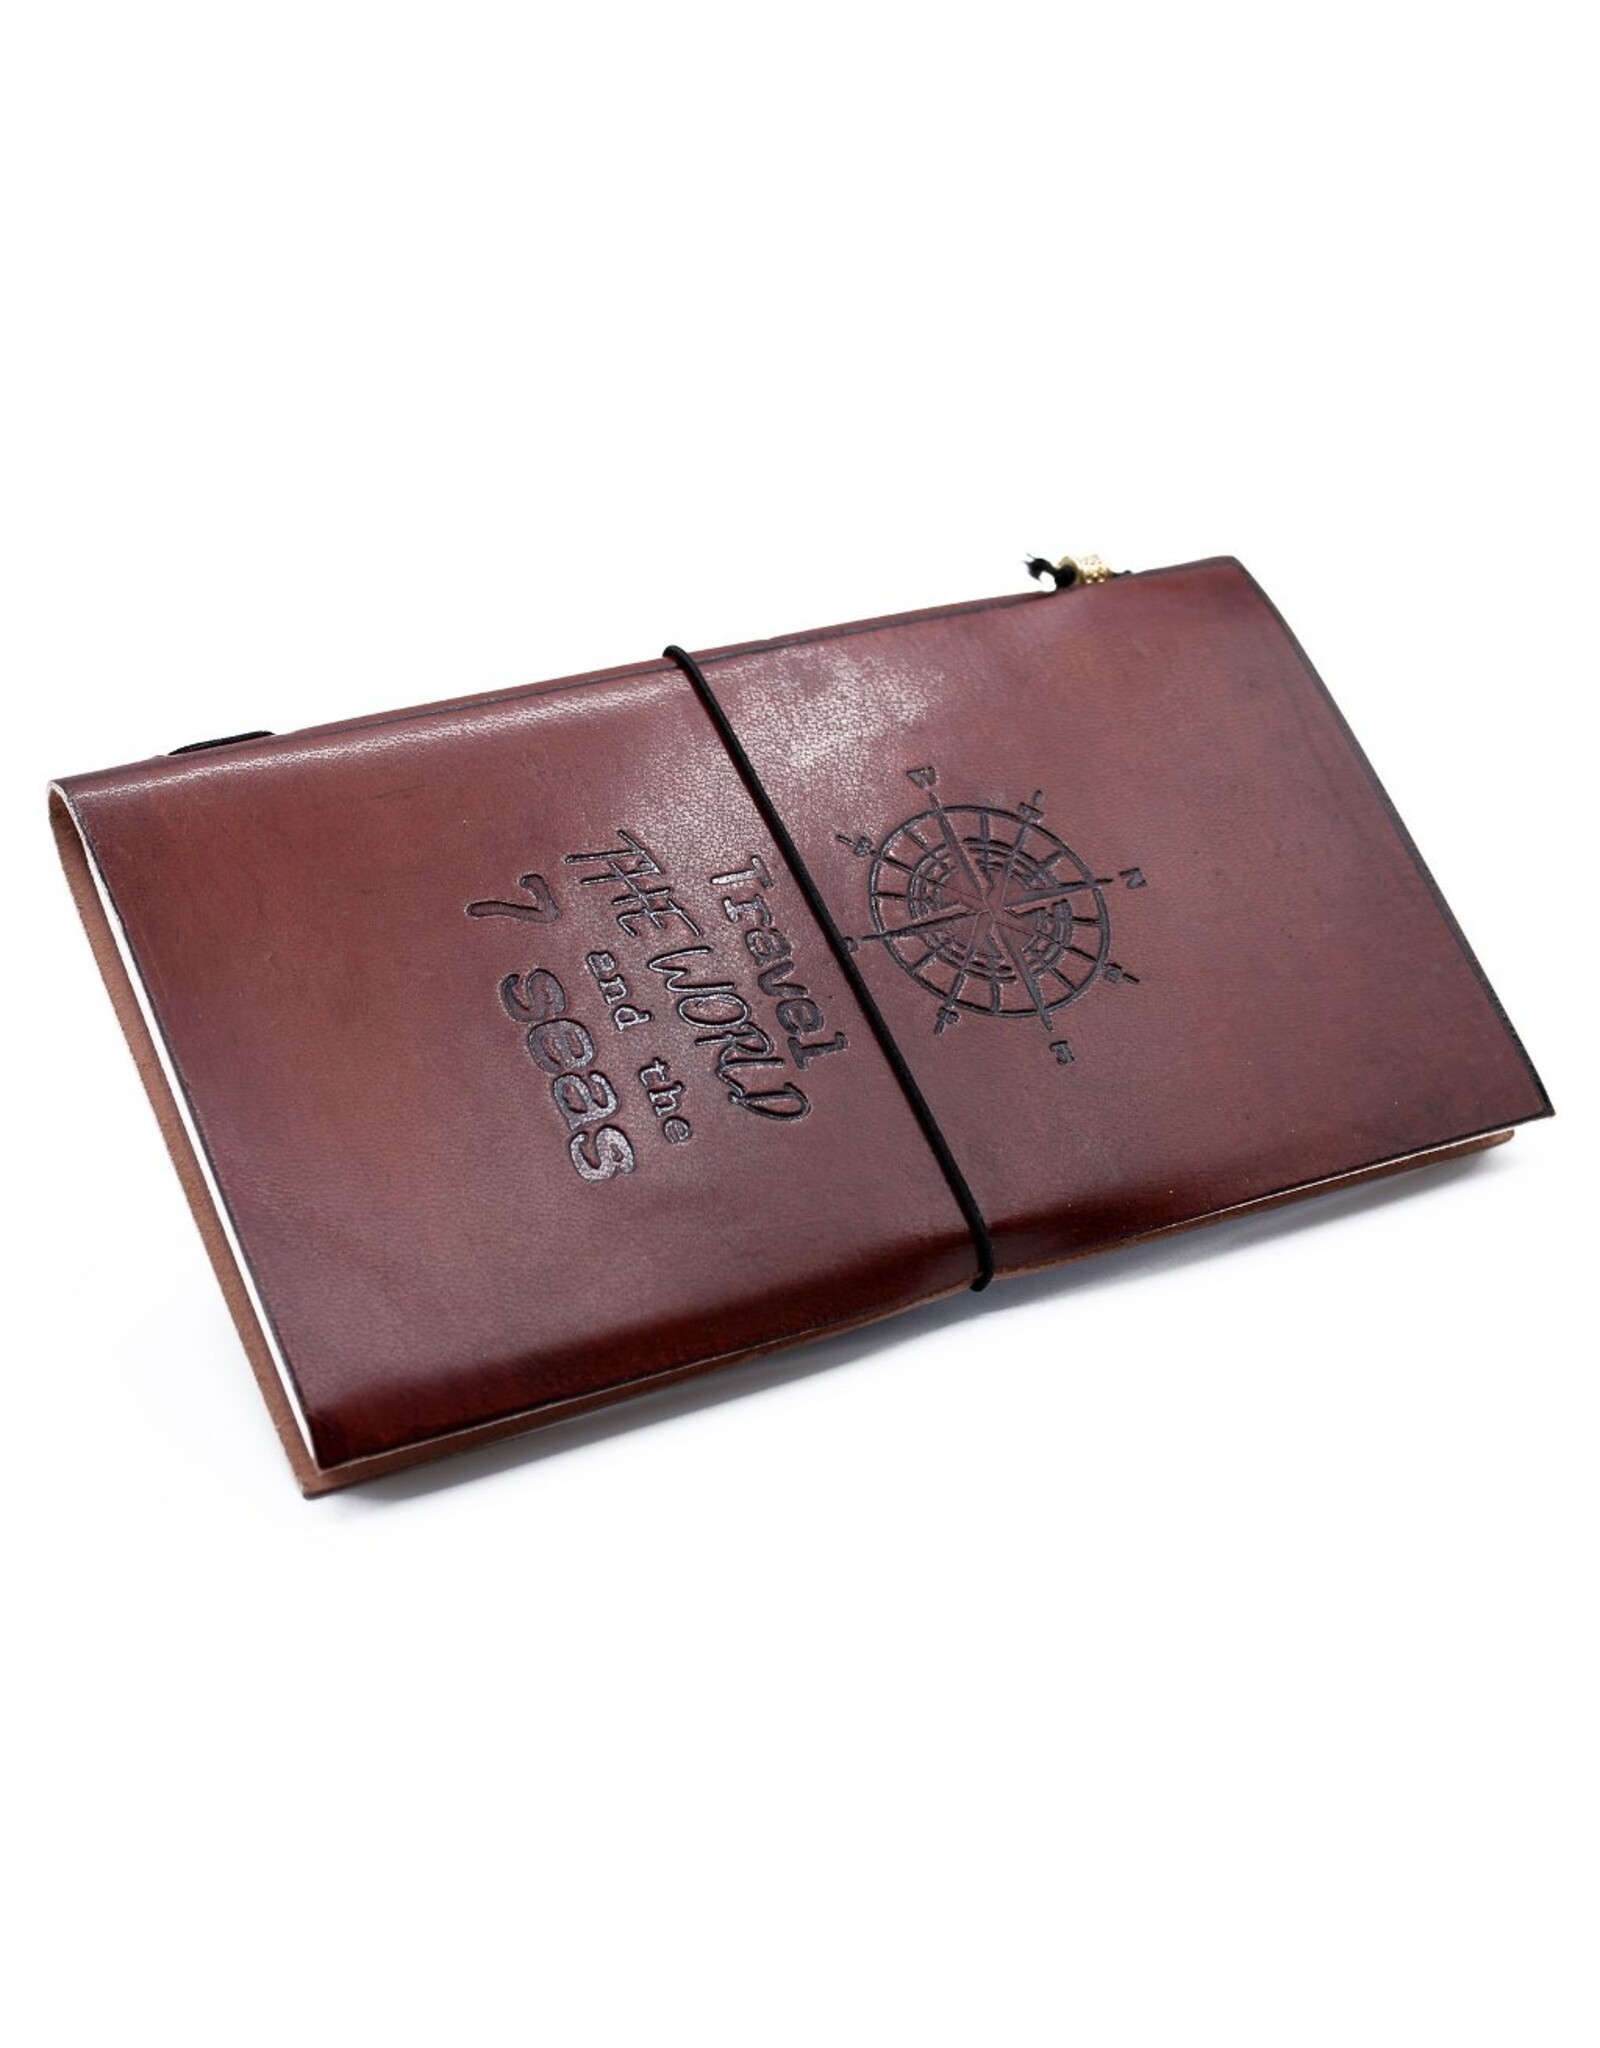 AWG Miscellaneous - Leather Journal 'Travel the World'  22x12cm opy